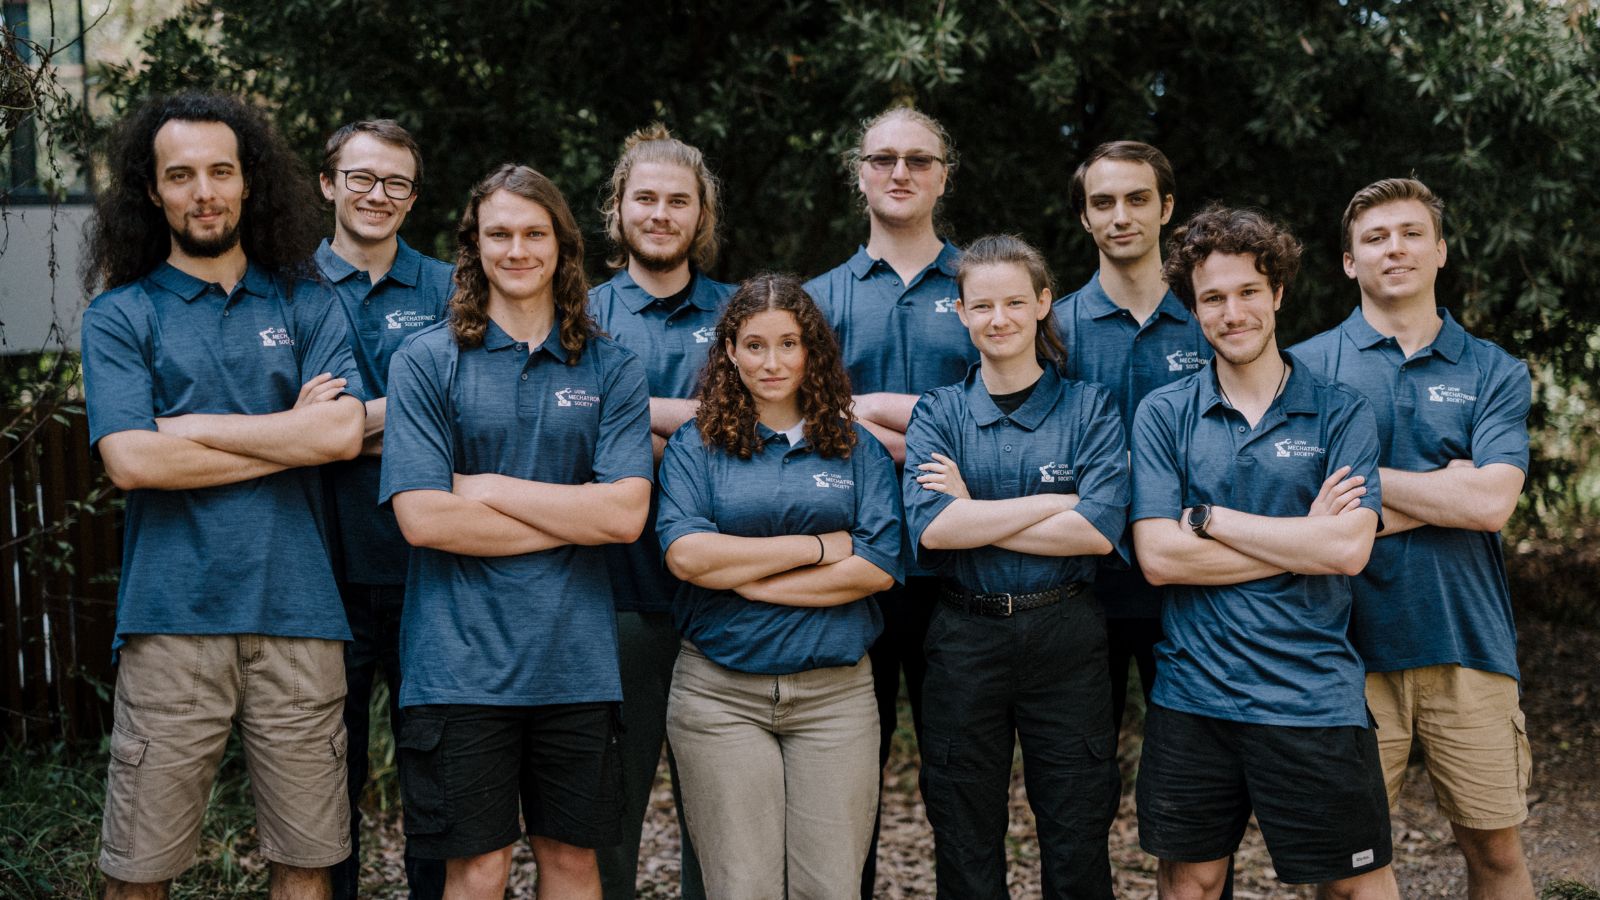 Students from UOW Rover team standing in a group smiling with their arms crossed. Photo: Michael Gray